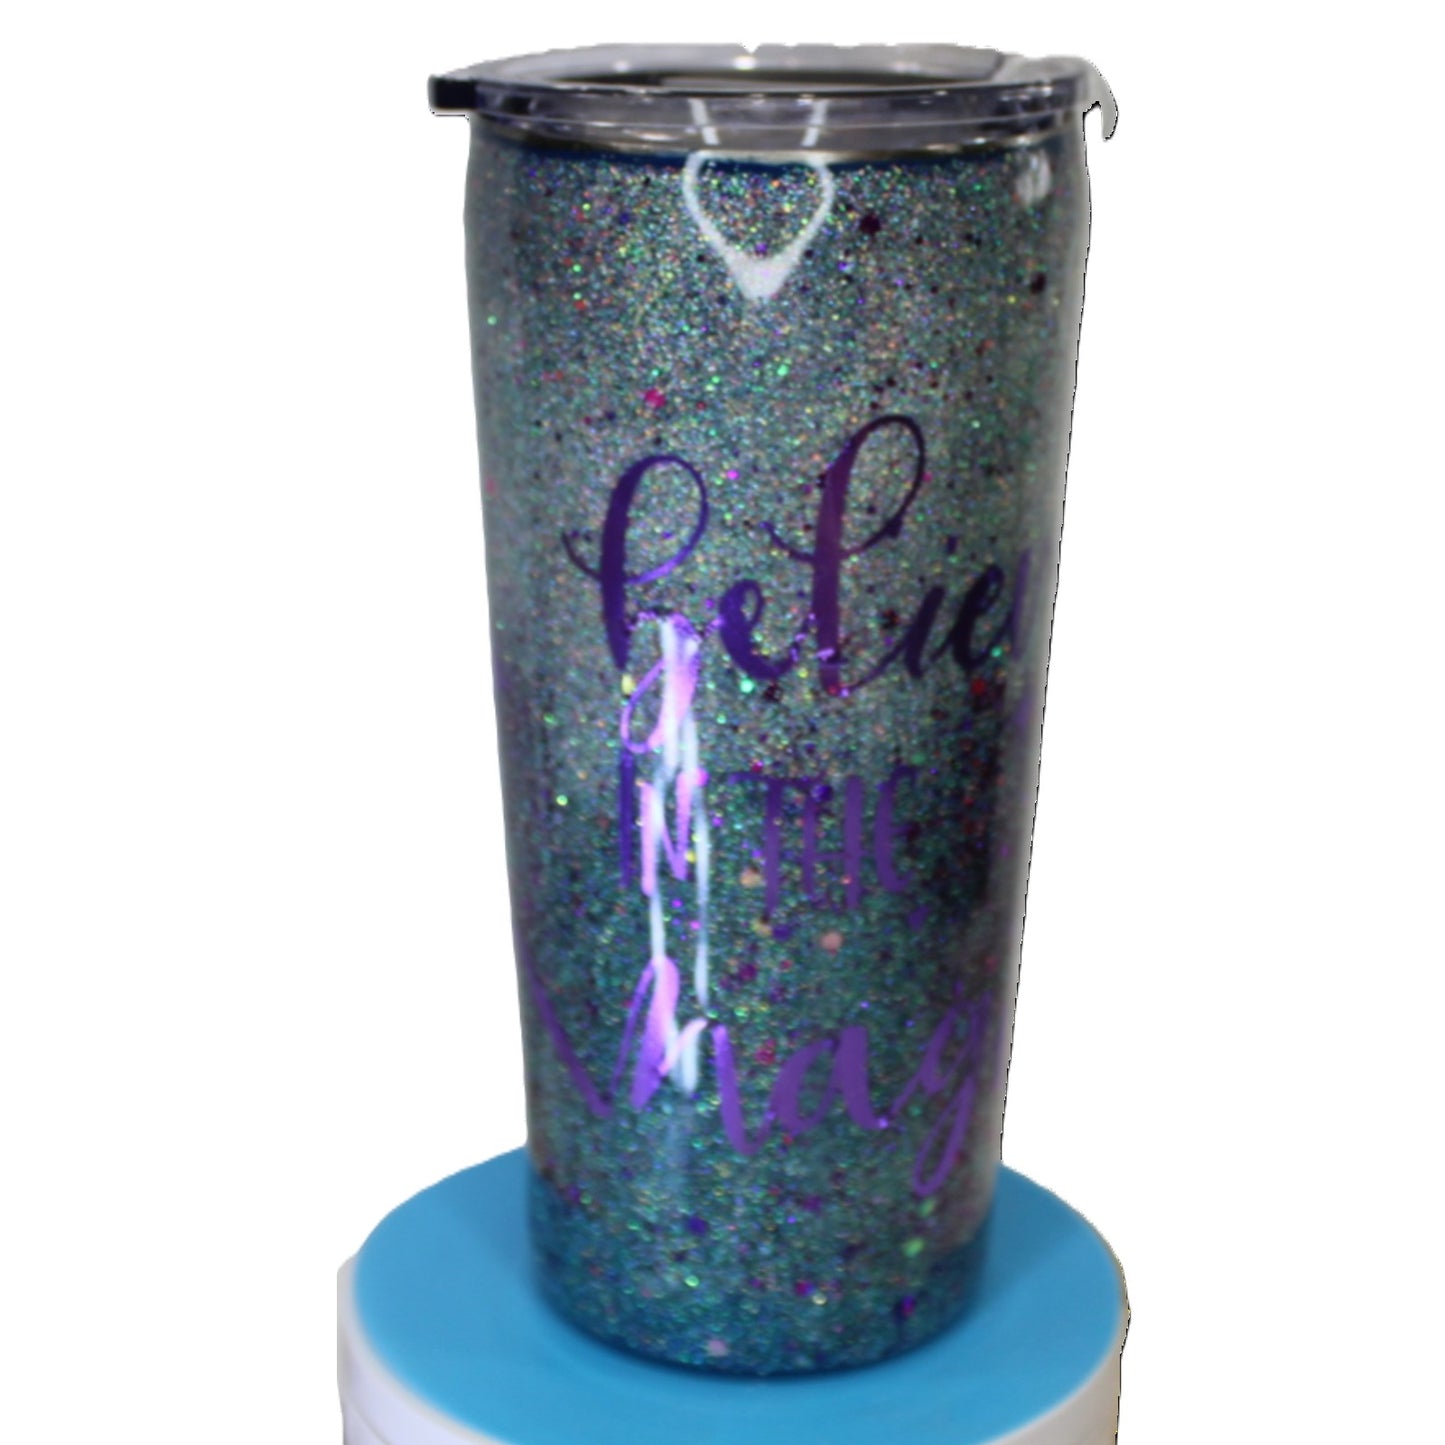 Tumbler Tapered Smooth 20 ounce with "Believe in the Magic" written on the side